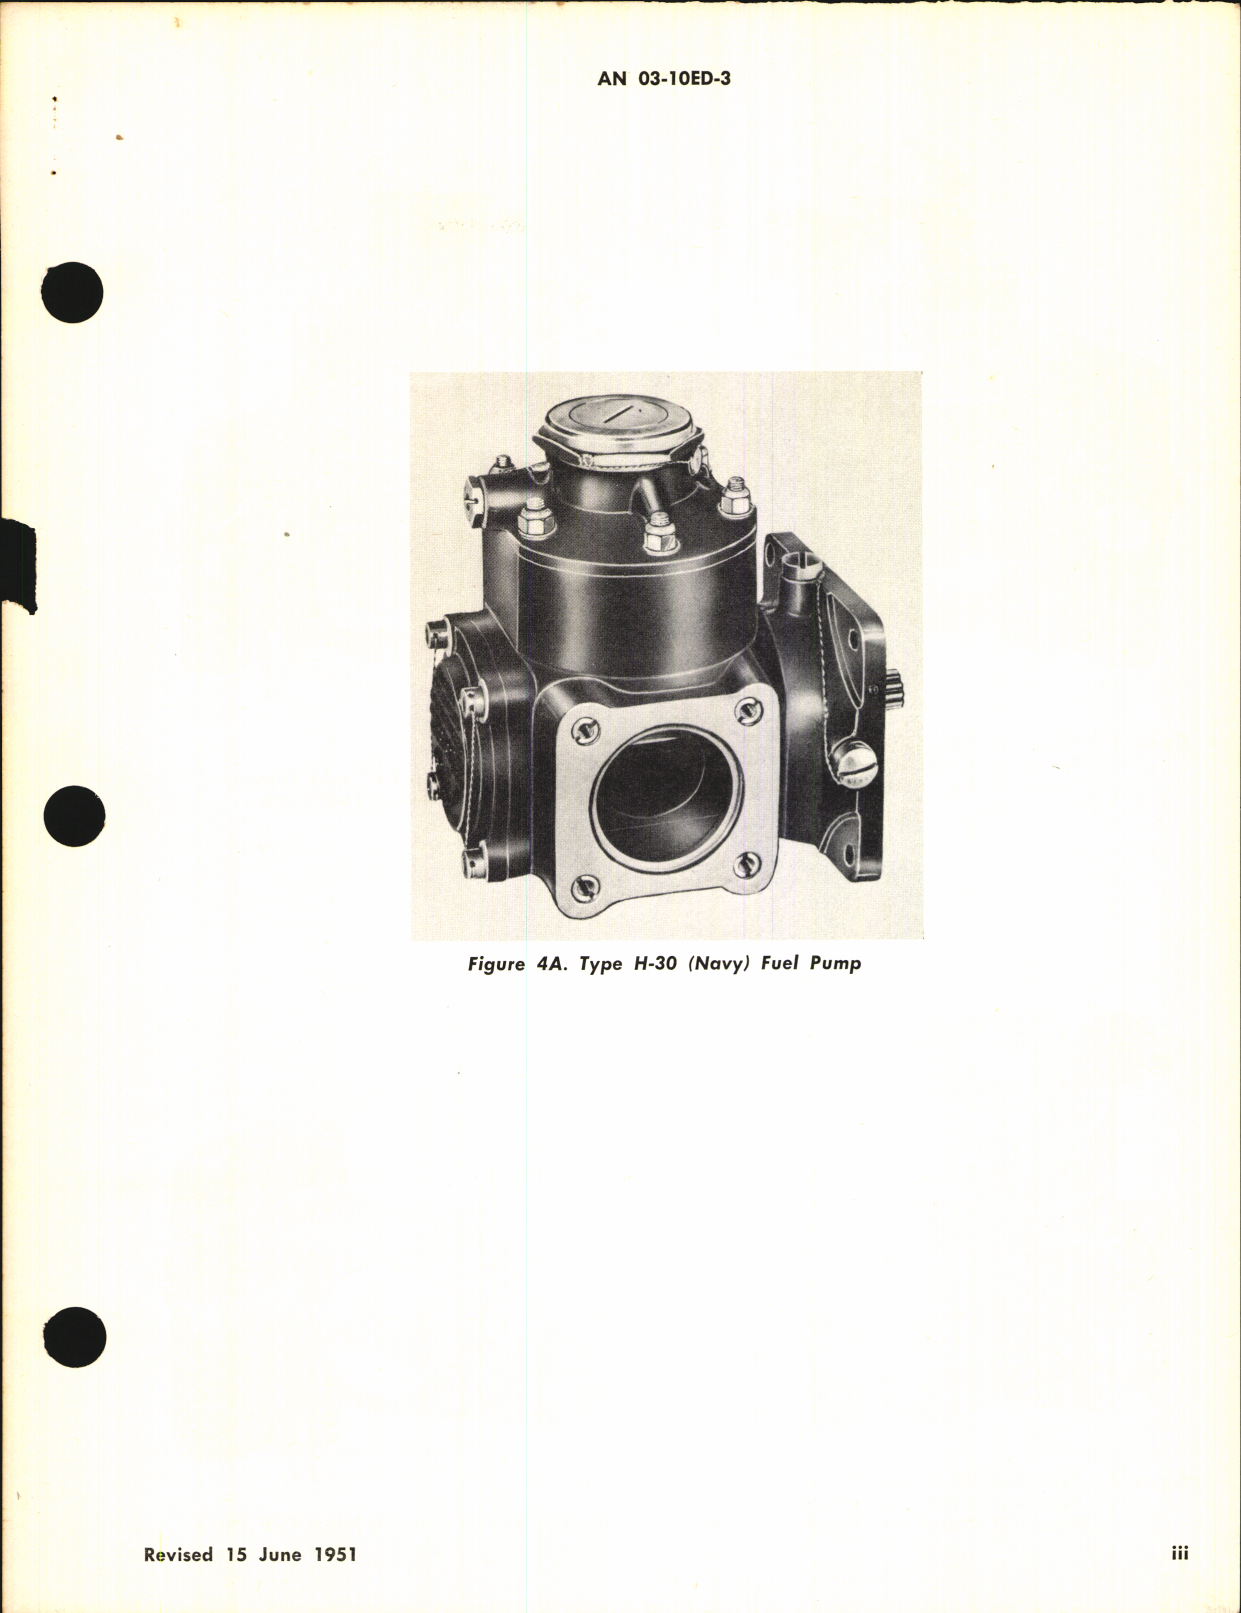 Sample page 5 from AirCorps Library document: Parts Catalog for Fuel and Water Pumps